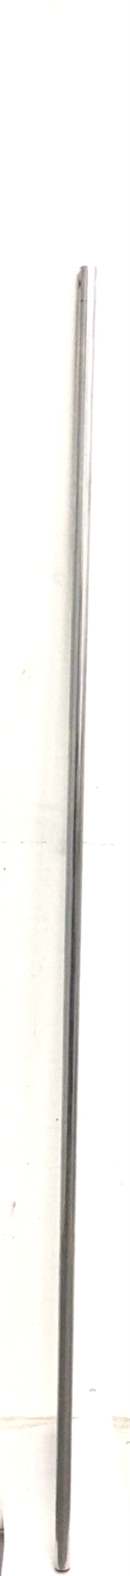 Weight Guide Rod 6ft -7 Inch -1.00od Inch (Used)